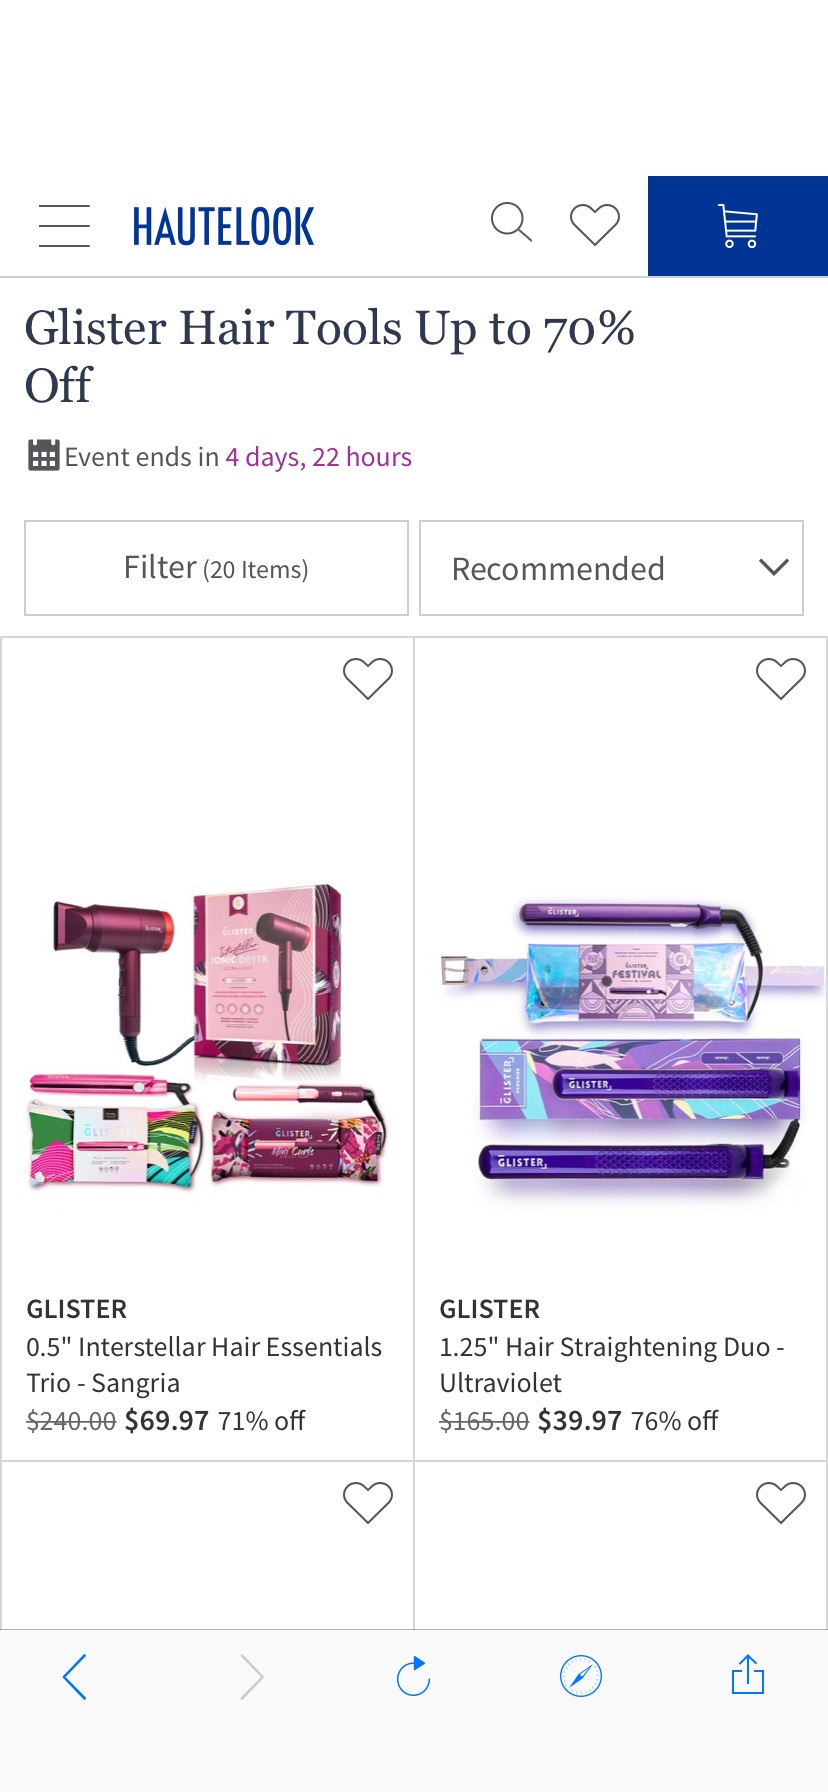 Glister Hair Tools Up to 70% Off美发工具